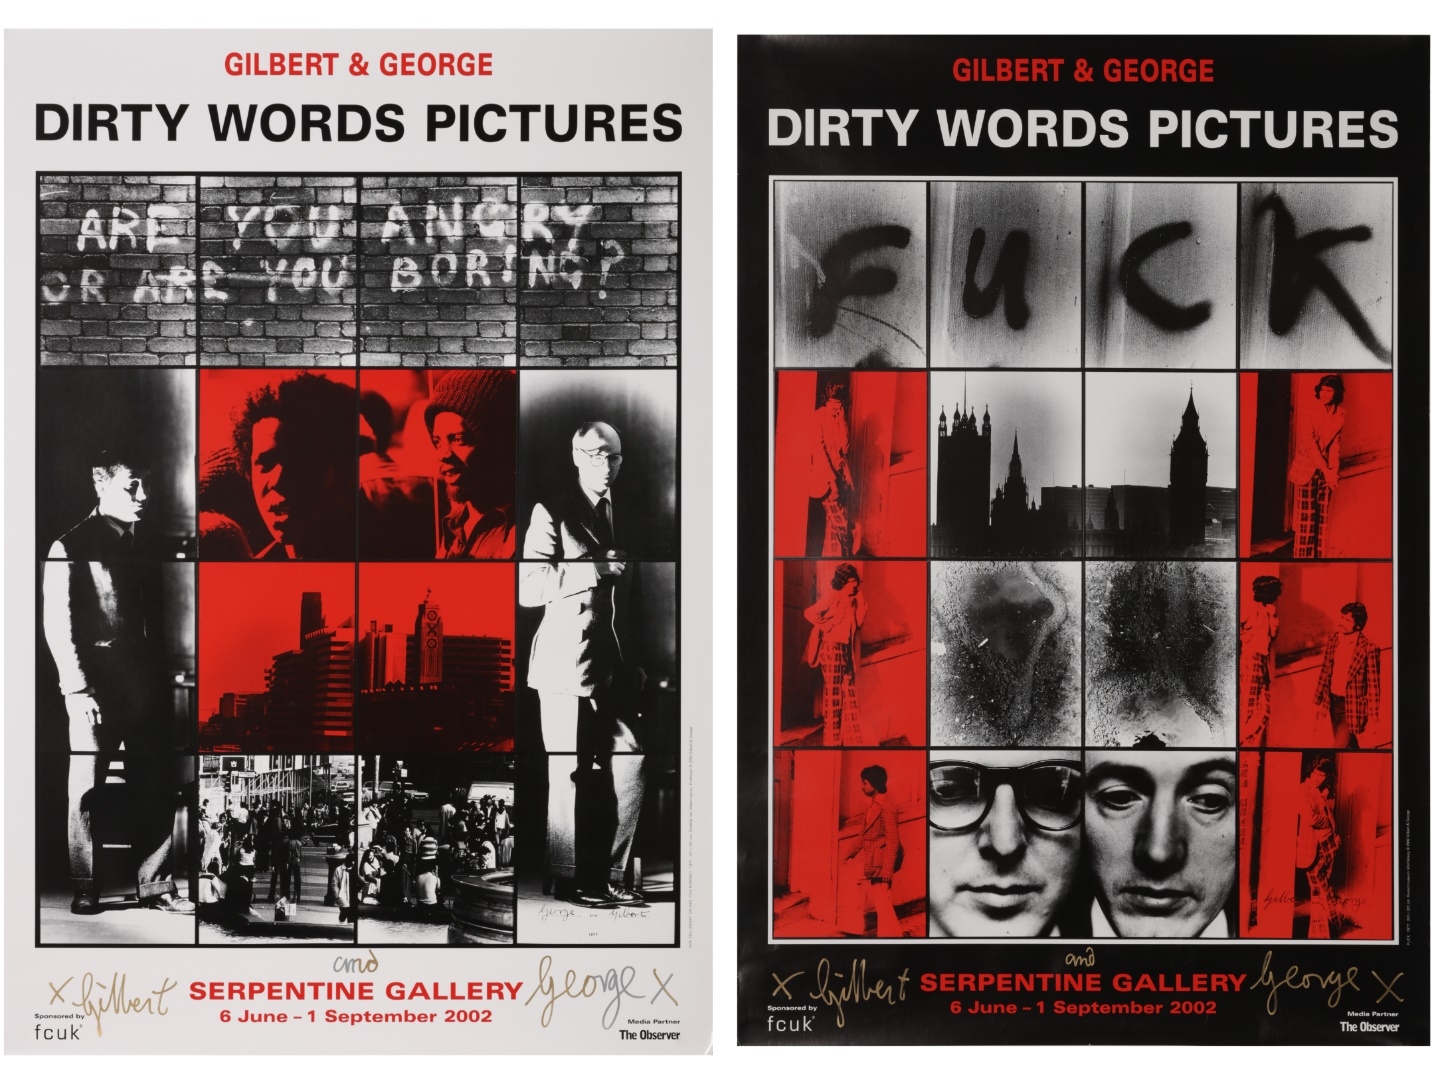 Dirty Words Pictures by Gilbert & George, 2002